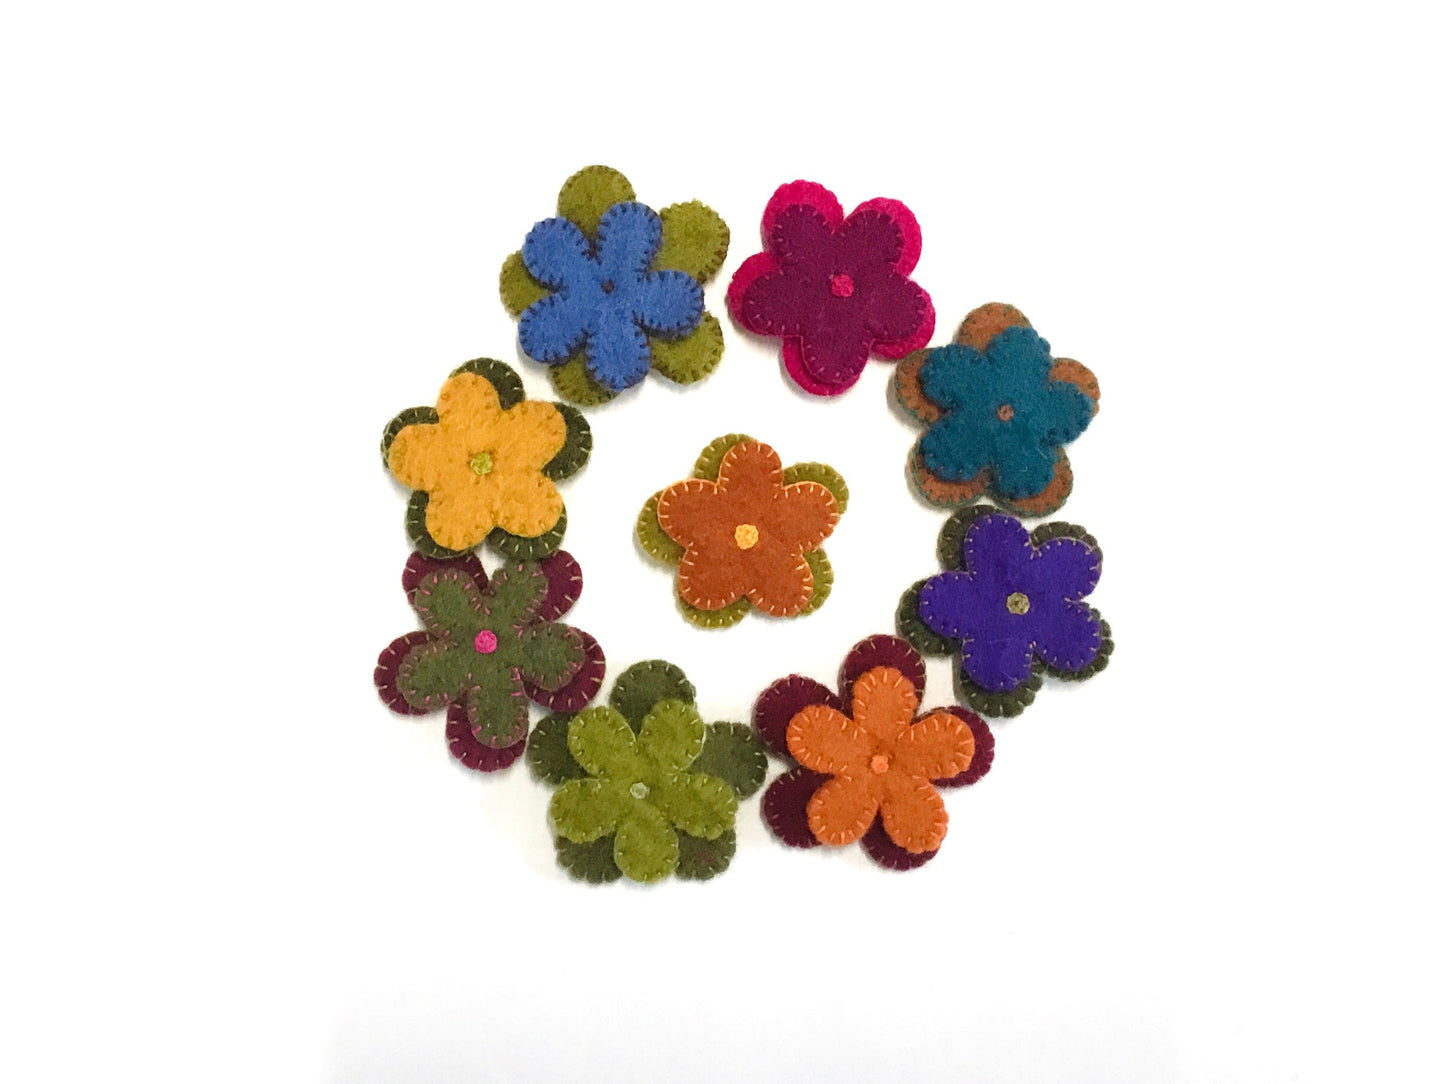 Decorative Wool Flower Pins - Fibres of Life